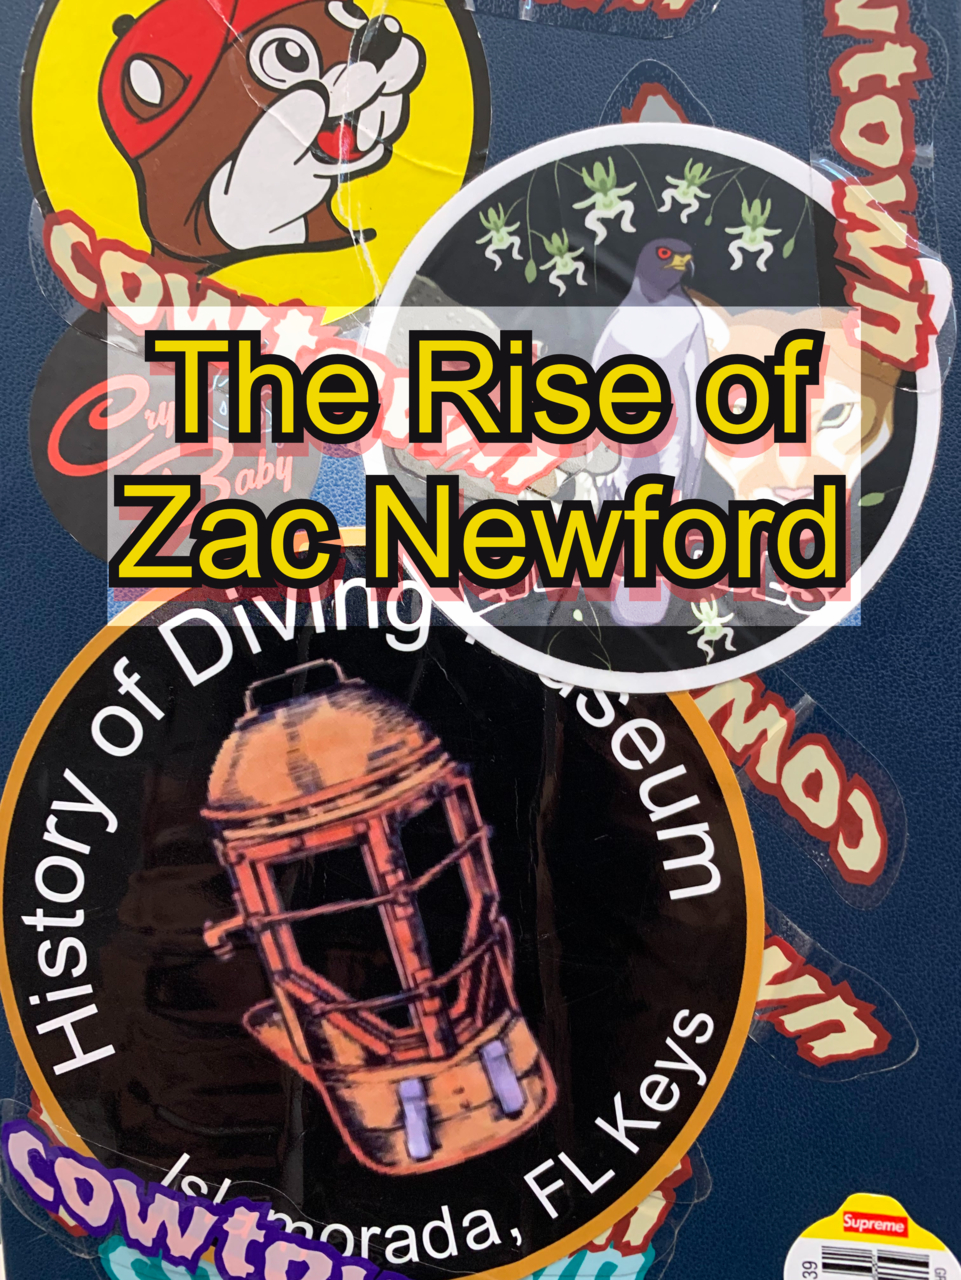 The Rise of Zac Newford